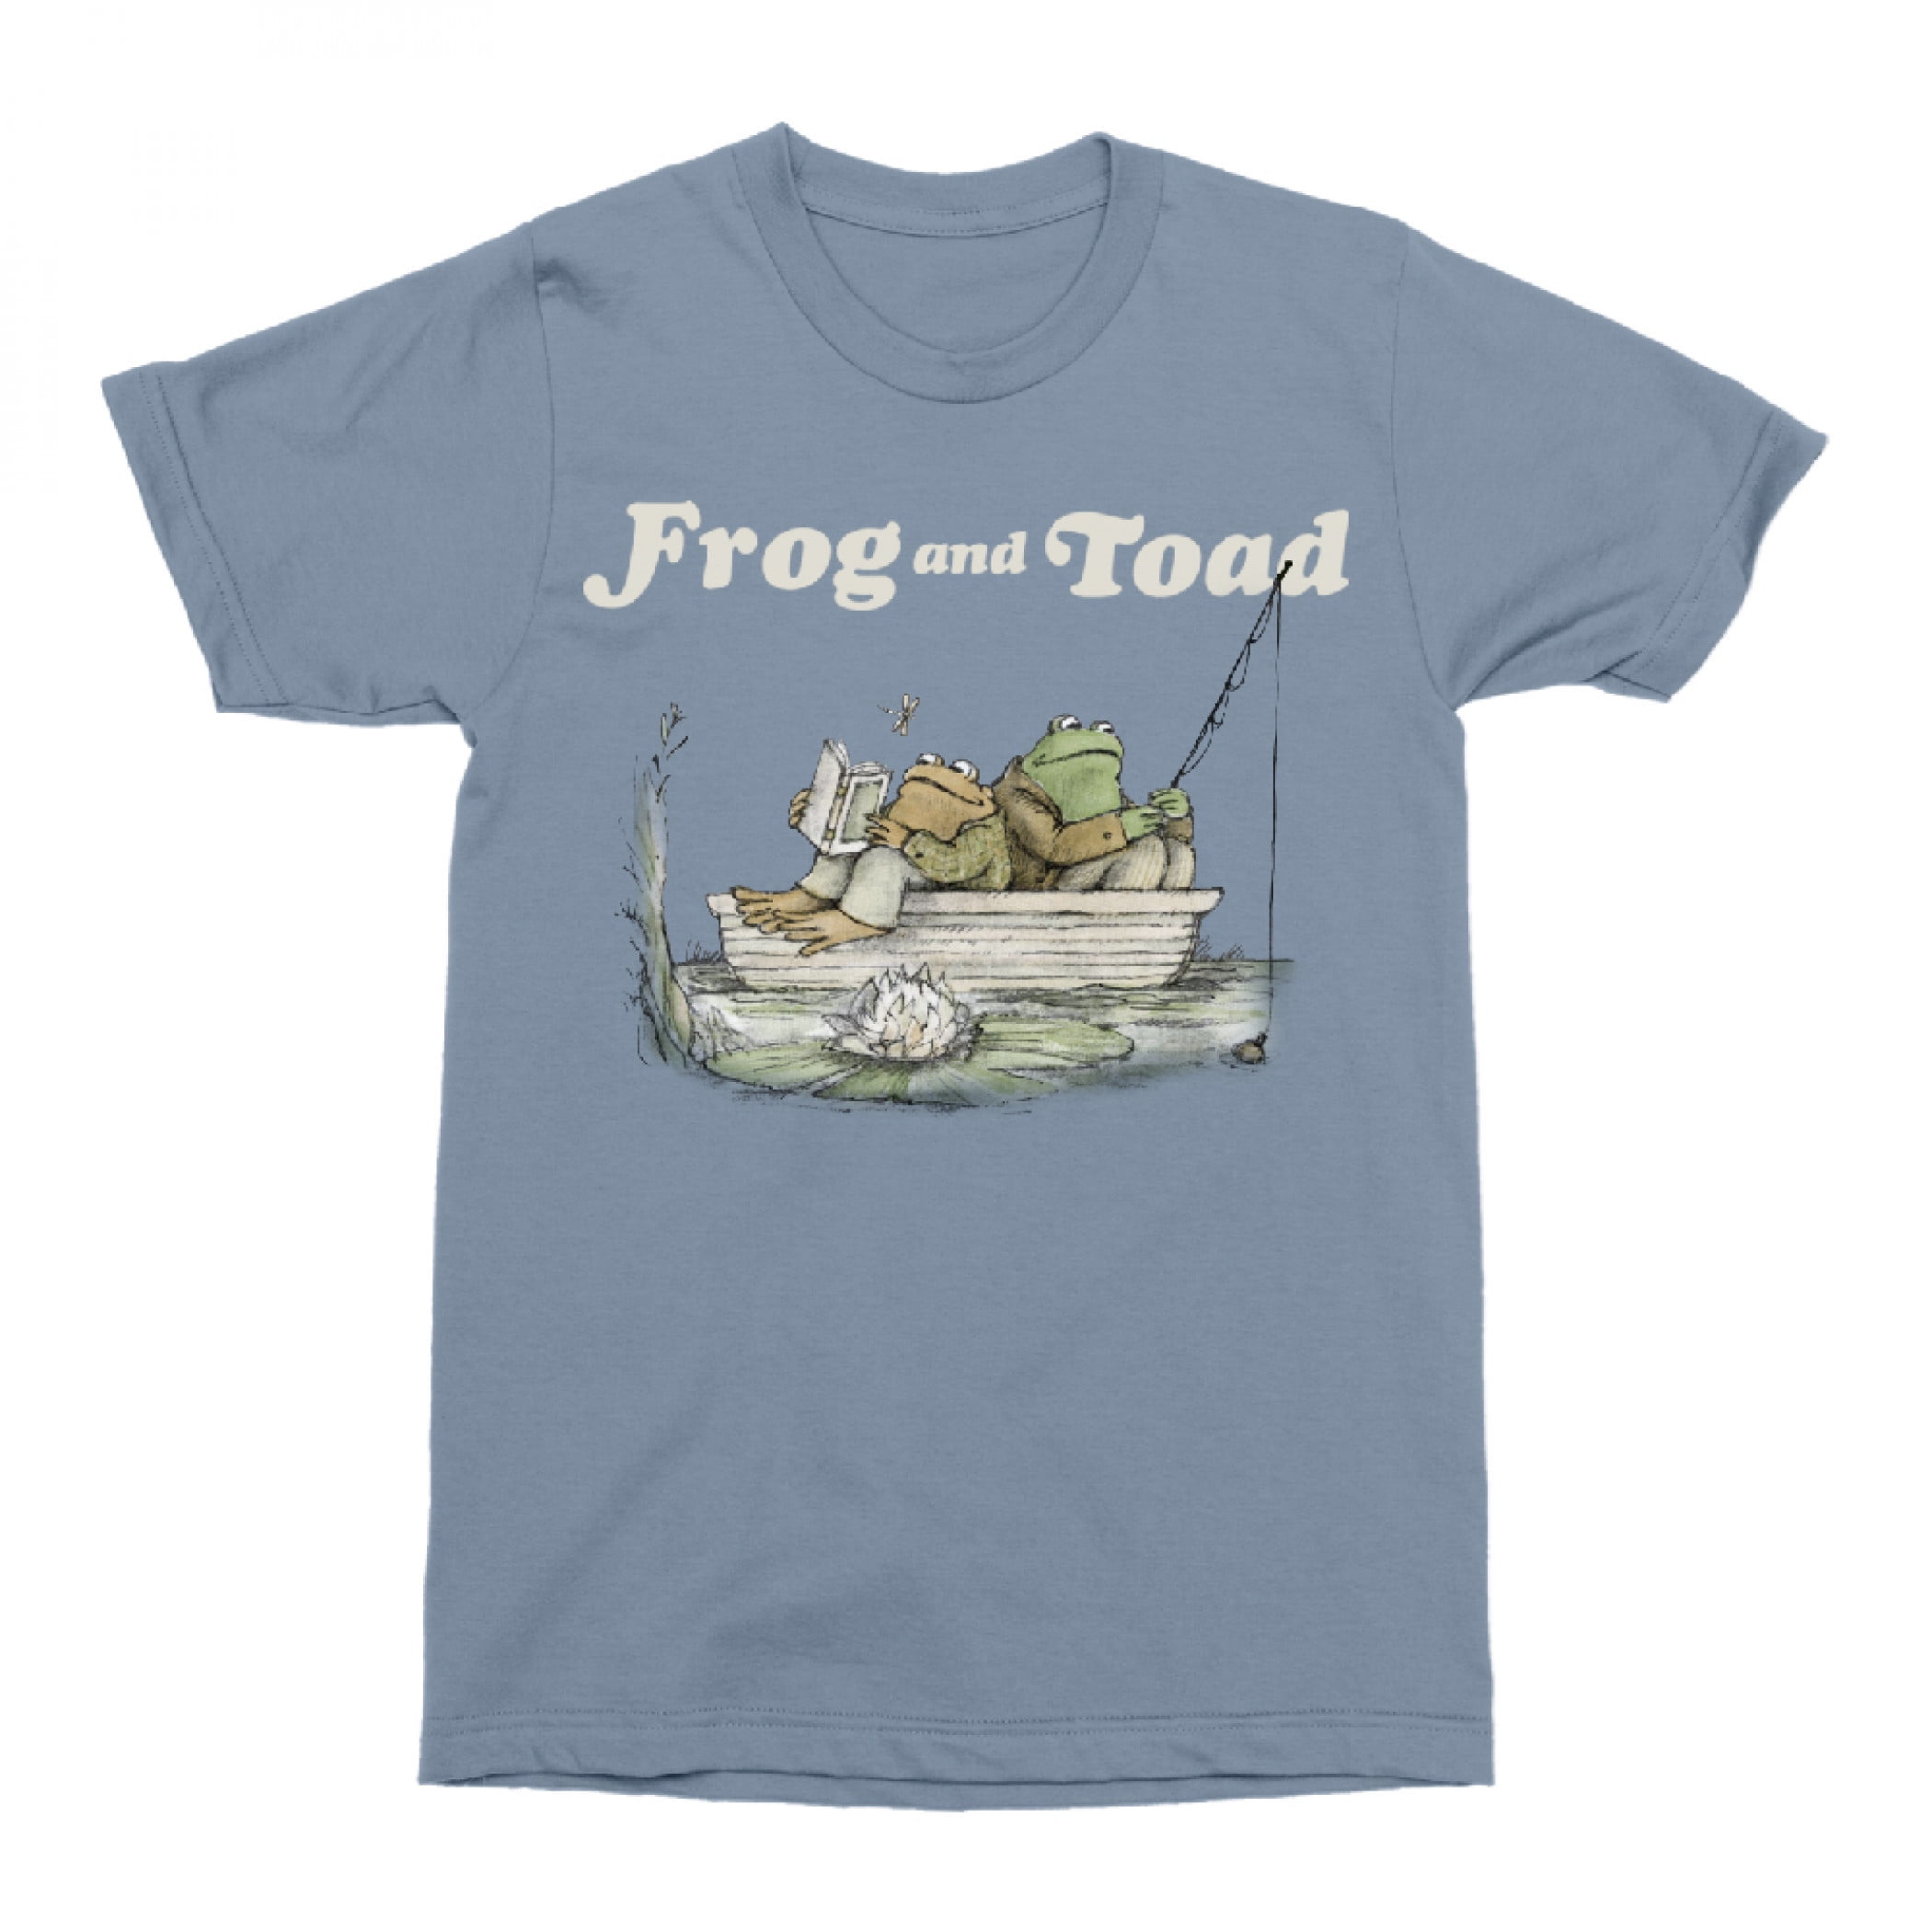 Frog and Toad Fishin' and Readin' T-Shirt Blue - Blue - Small